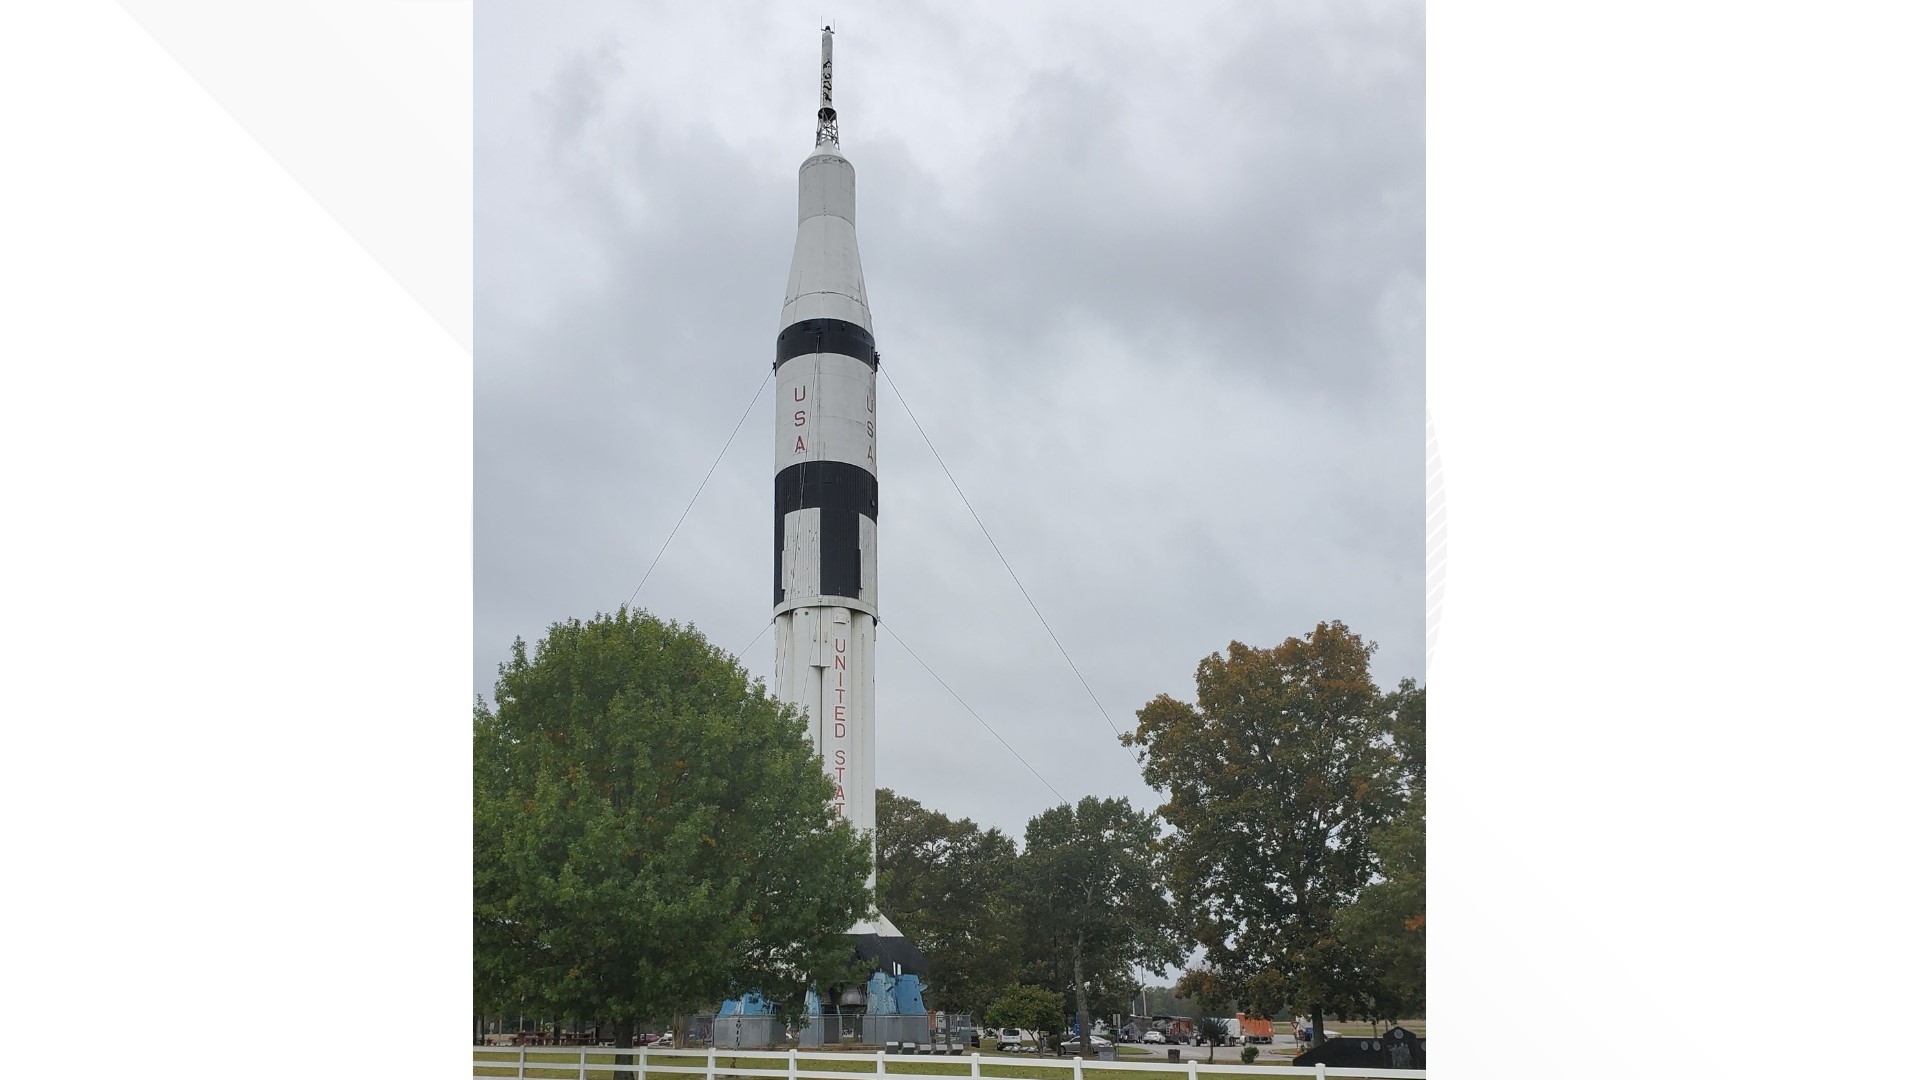 Safety concerns about the aging rocket mean that it will soon pass into Alabama lore.